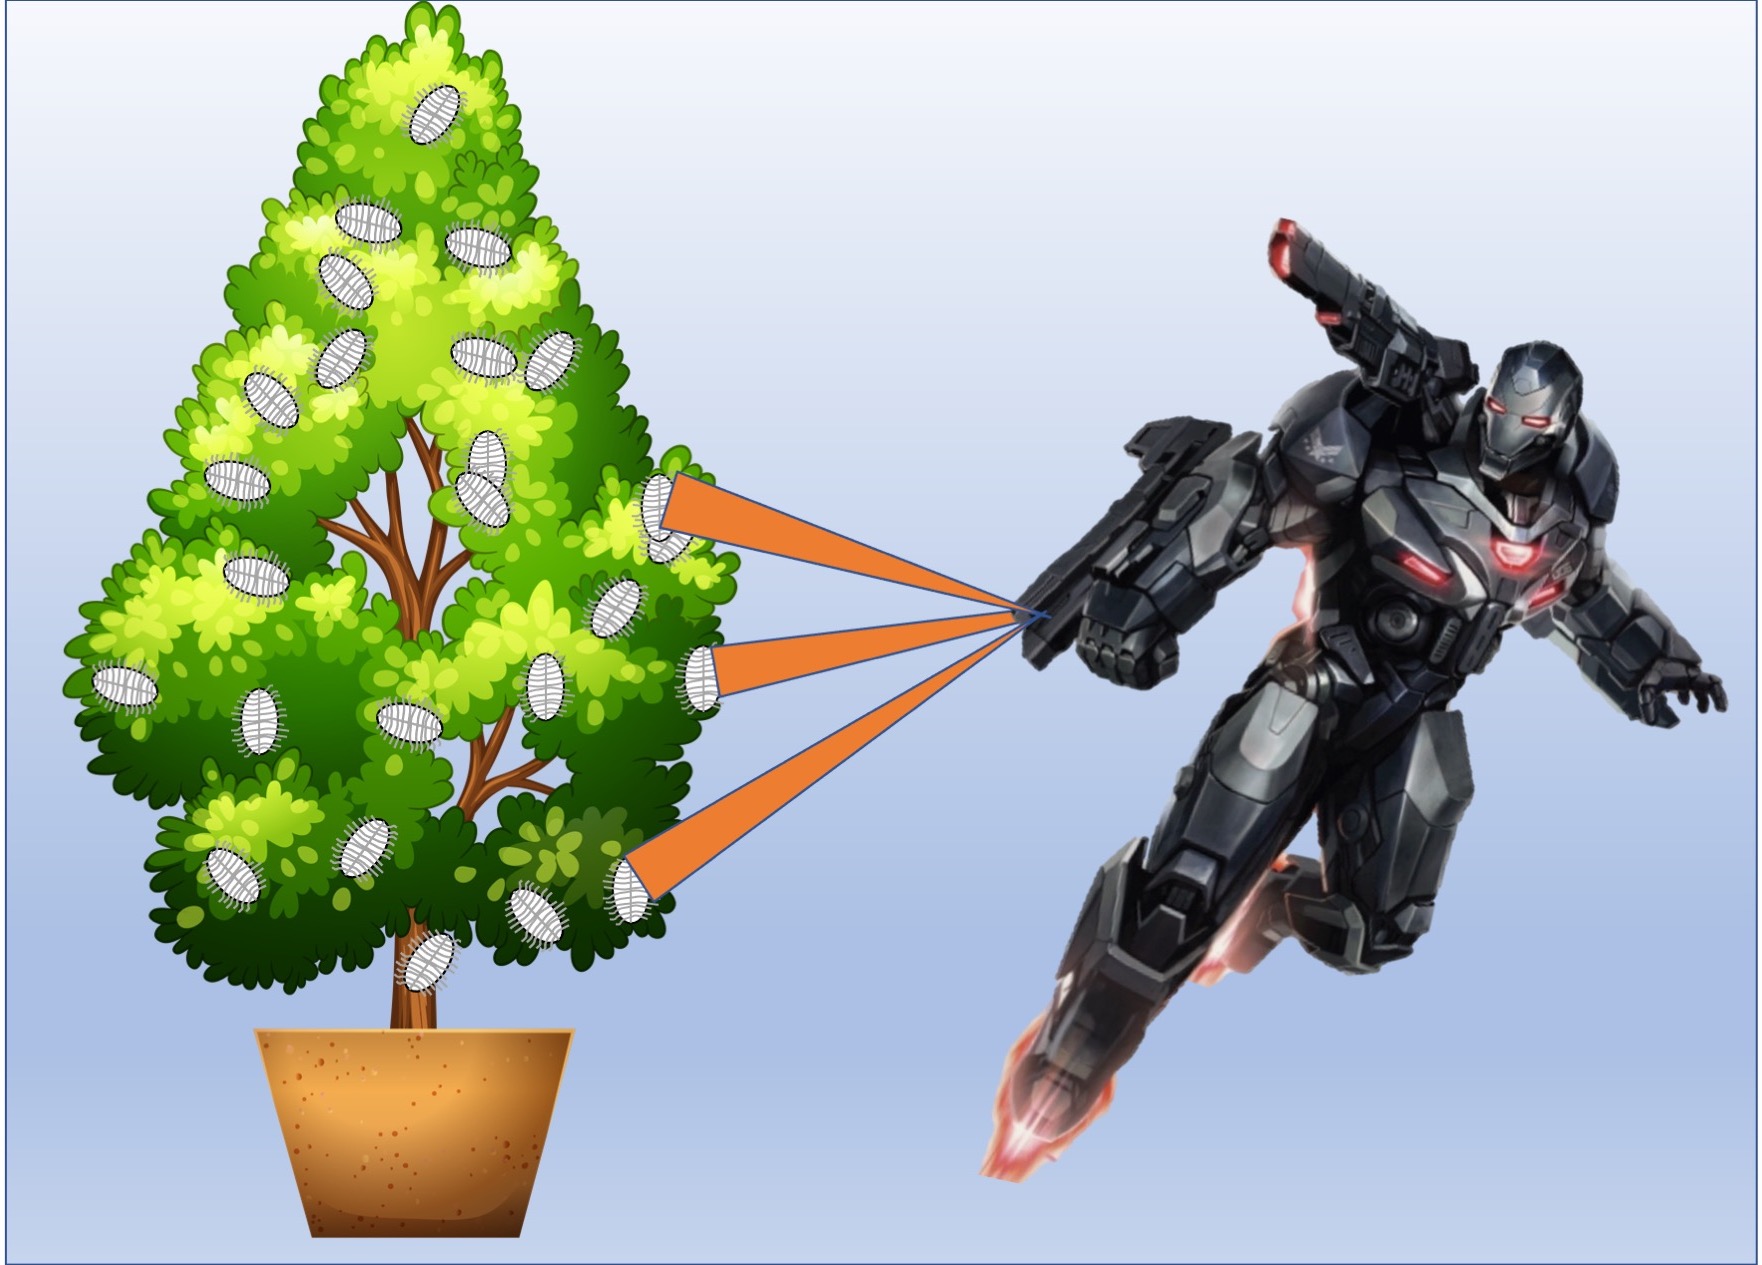 Robot warrior destroying mealybugs with death ray.